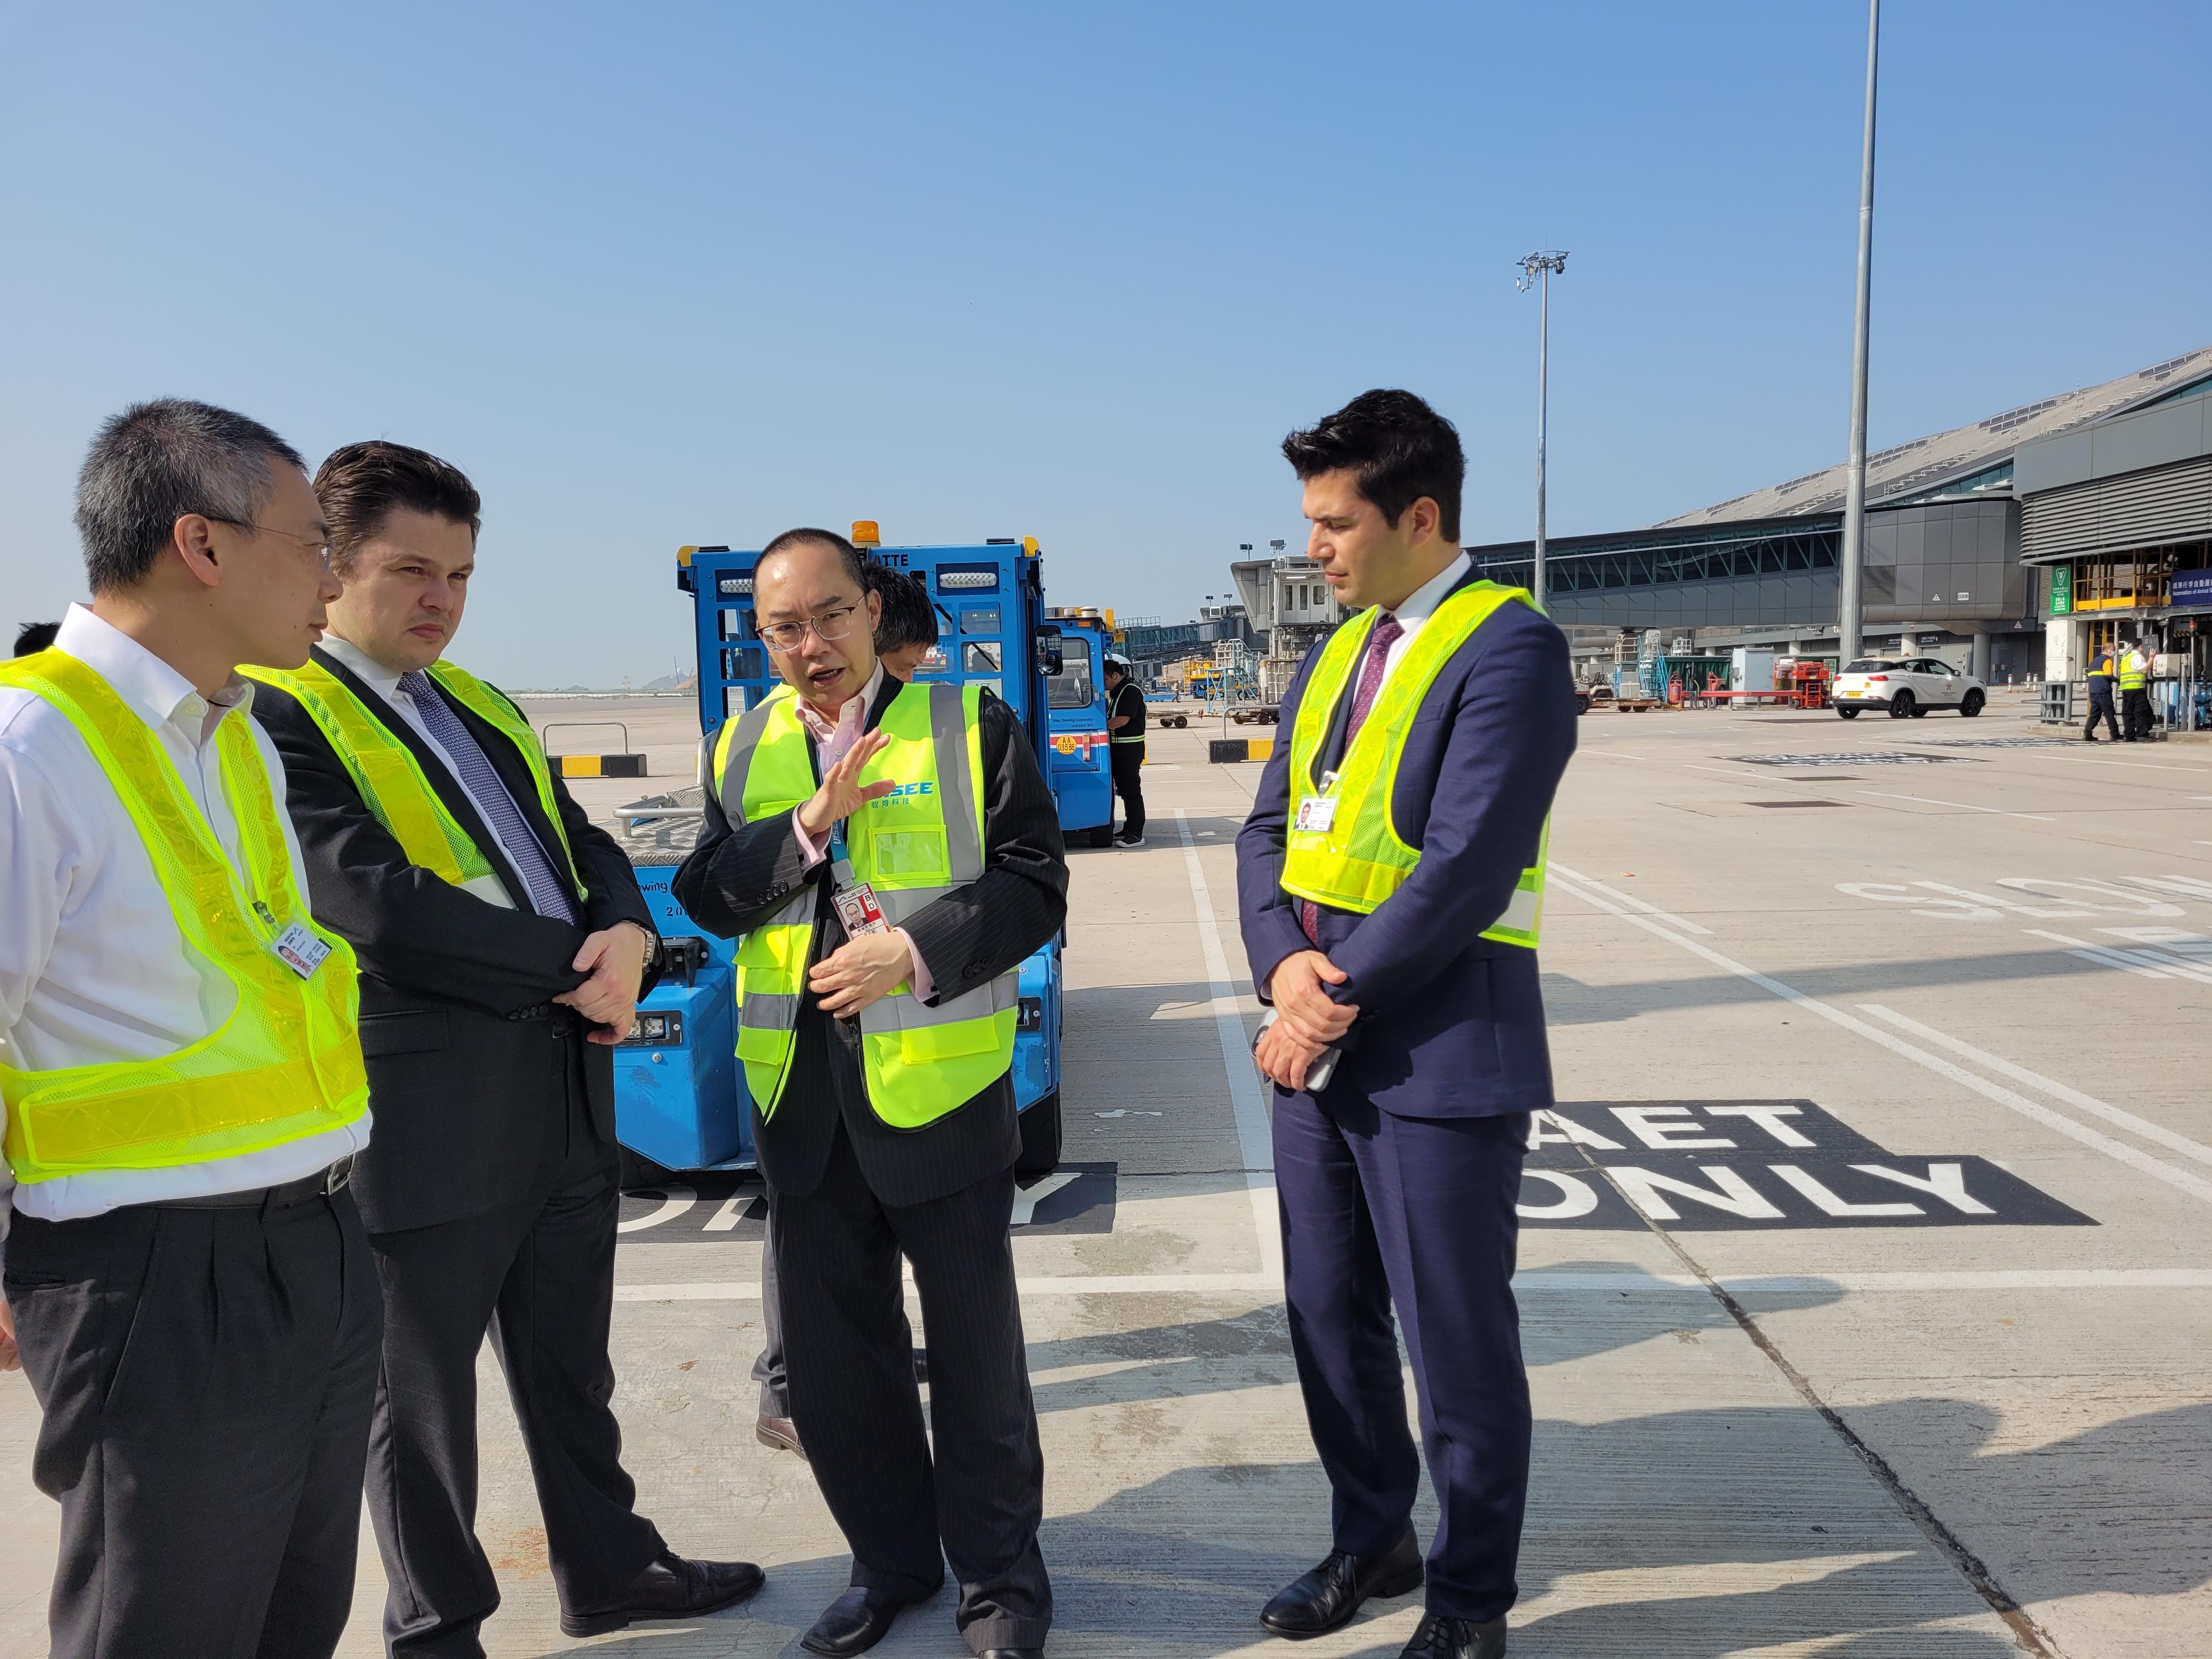 AI driverless technology company UISEE announced it will set up its international headquarters, a research and development centre and a corporate treasury centre in Hong Kong. Photo shows the Head of International Development of UISEE, Mr Dennis Cheung (second right), showcasing driverless vehicles to overseas dignitaries at Hong Kong International Airport.